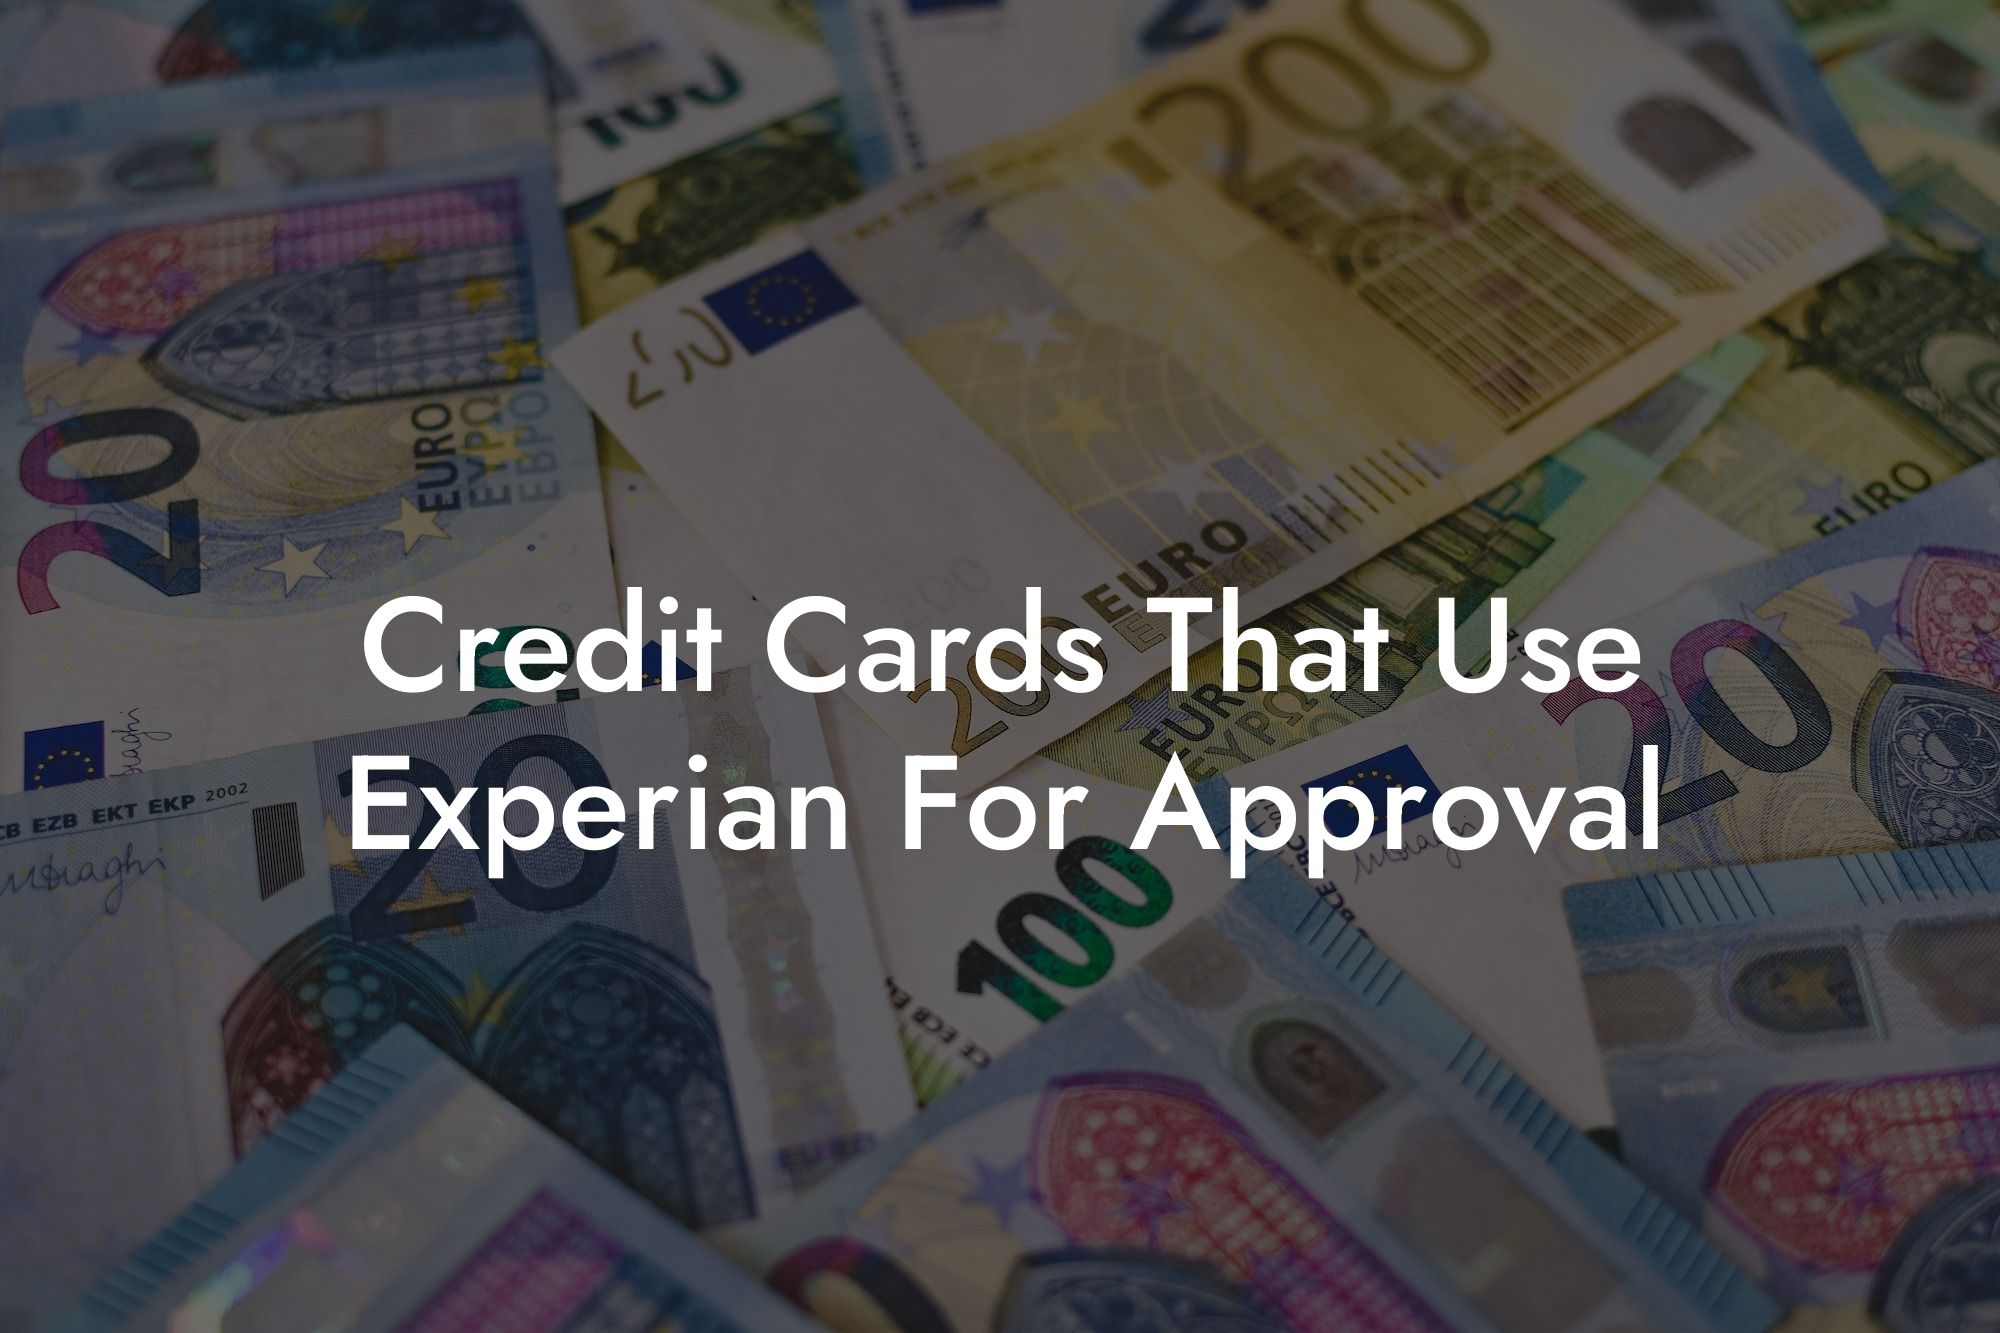 Credit Cards That Use Experian For Approval